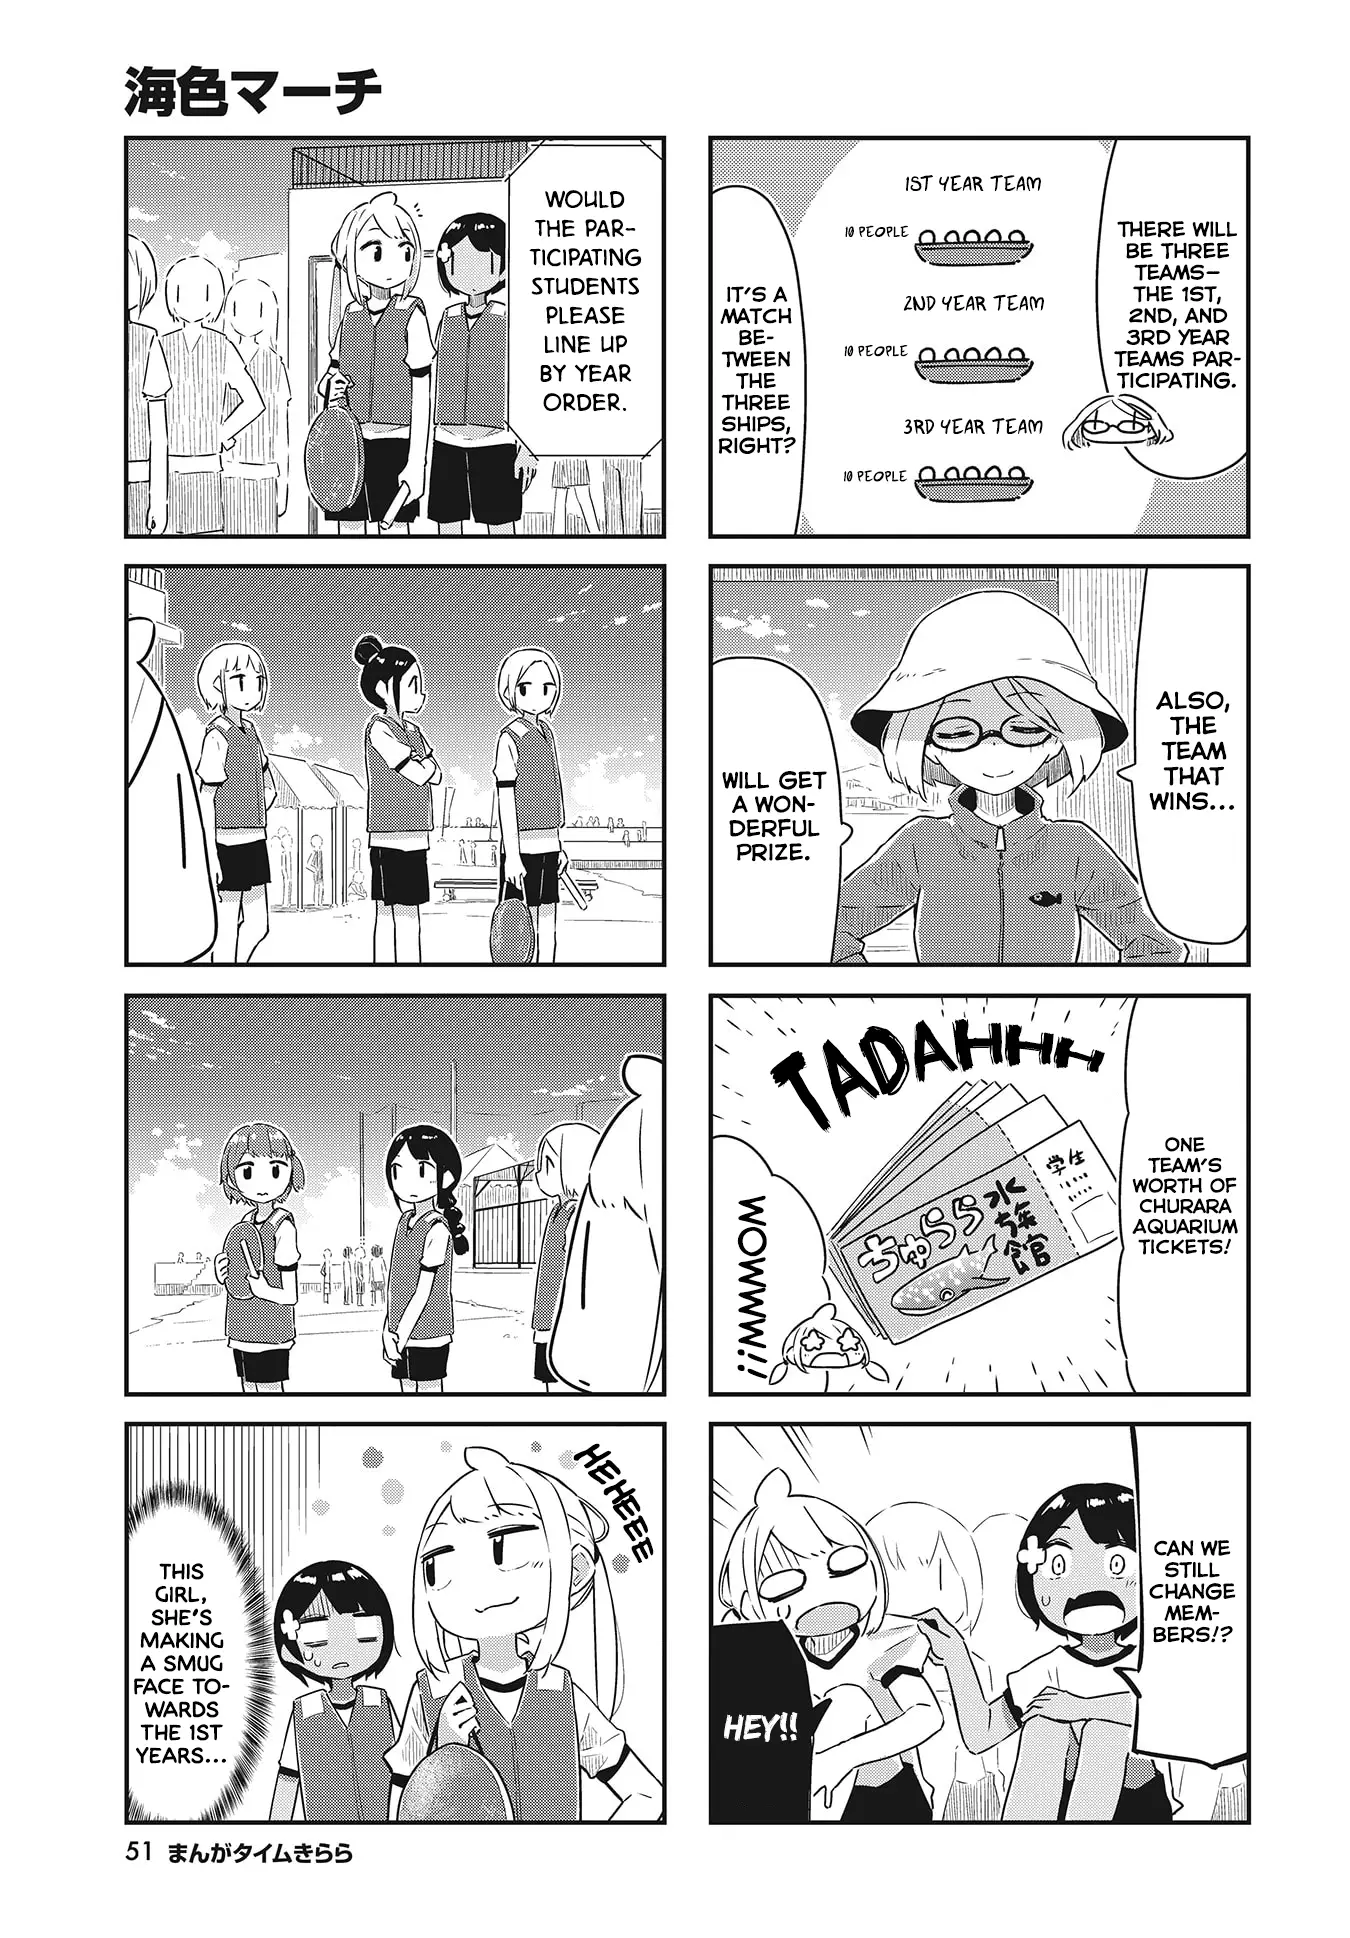 Umiiro March - 18 page 4